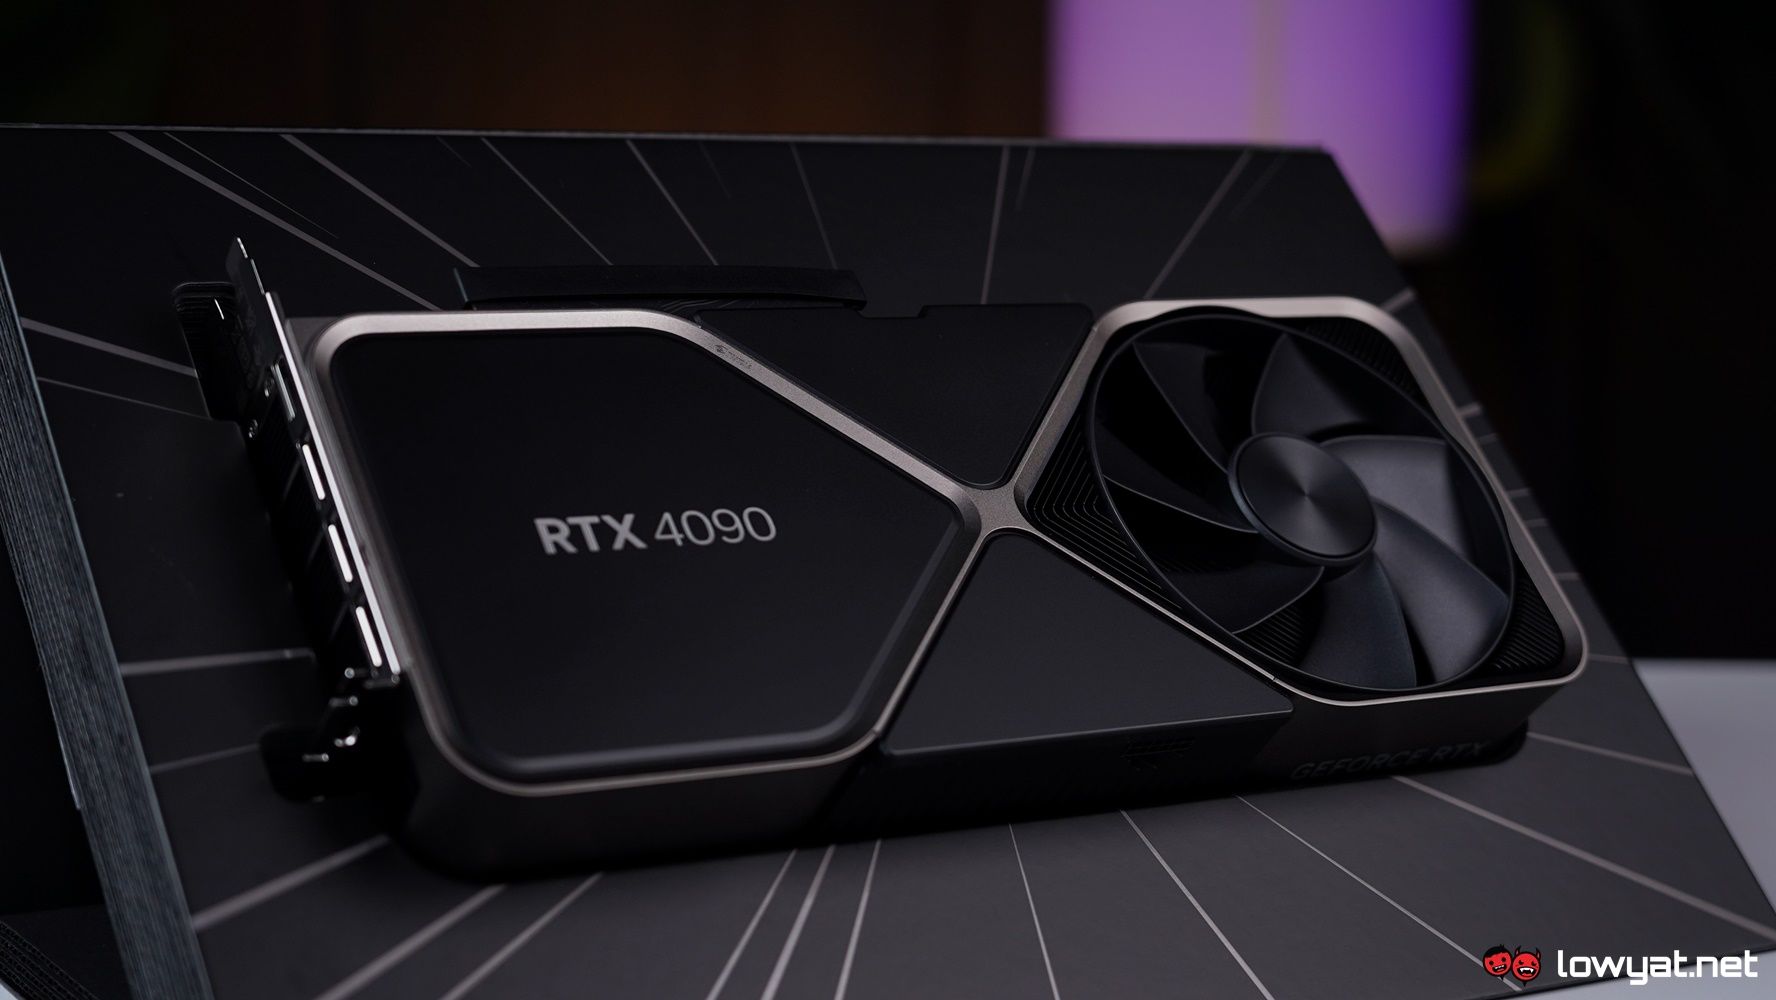 New Nvidia RTX 4090D for the Chinese Market Appears Designed to Evade  Export Controls